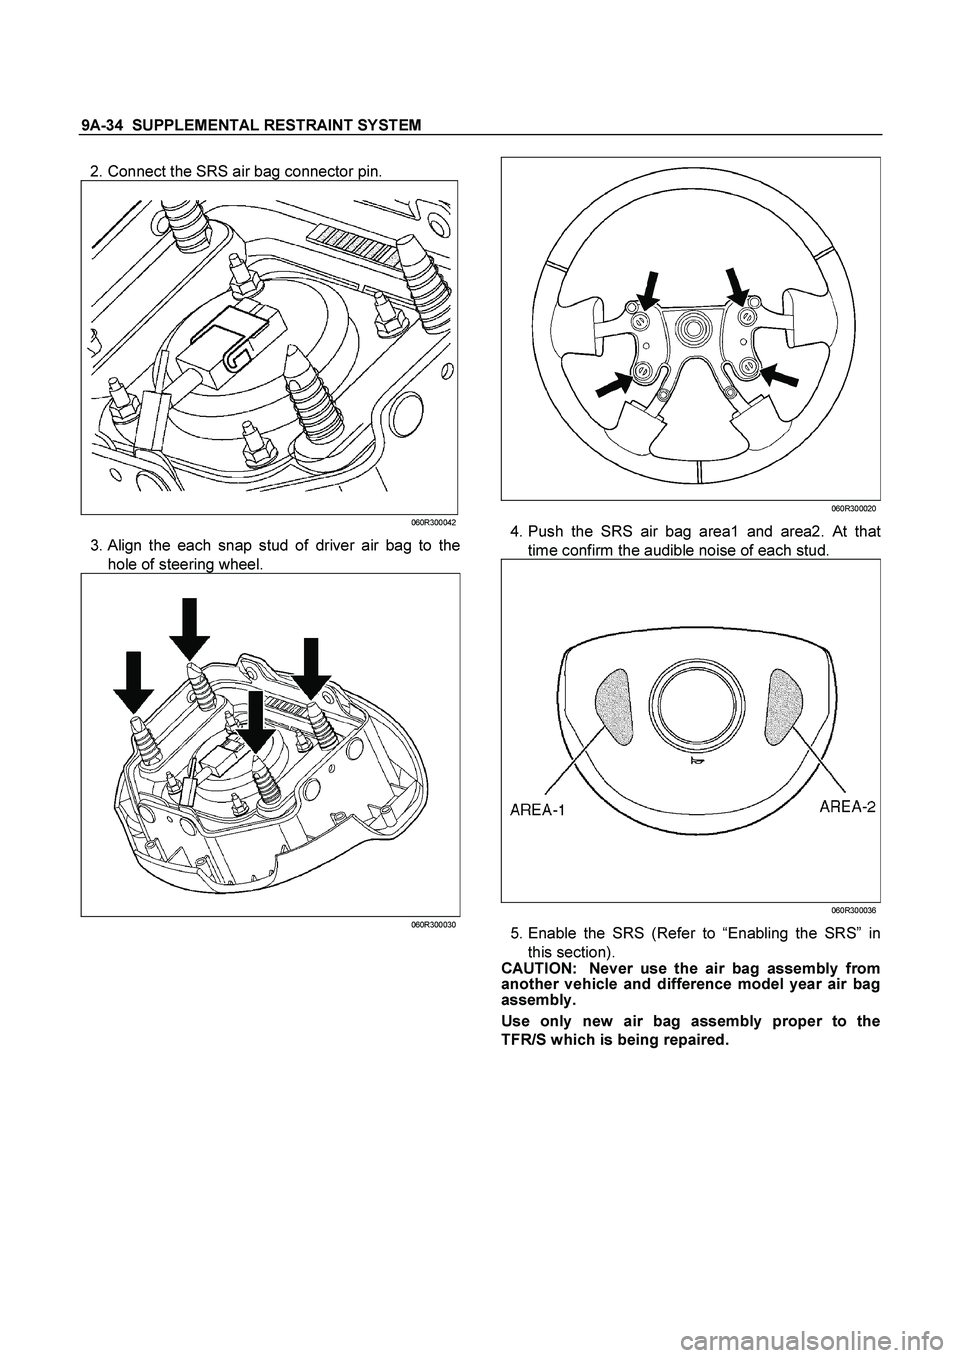 ISUZU TF SERIES 2004  Workshop Manual 9A-34  SUPPLEMENTAL RESTRAINT SYSTEM
 
  2. Connect the SRS air bag connector pin. 
 
060R300042
 3. Align the each snap stud of driver air bag to the
hole of steering wheel. 
060R300030
 
  
060R3000